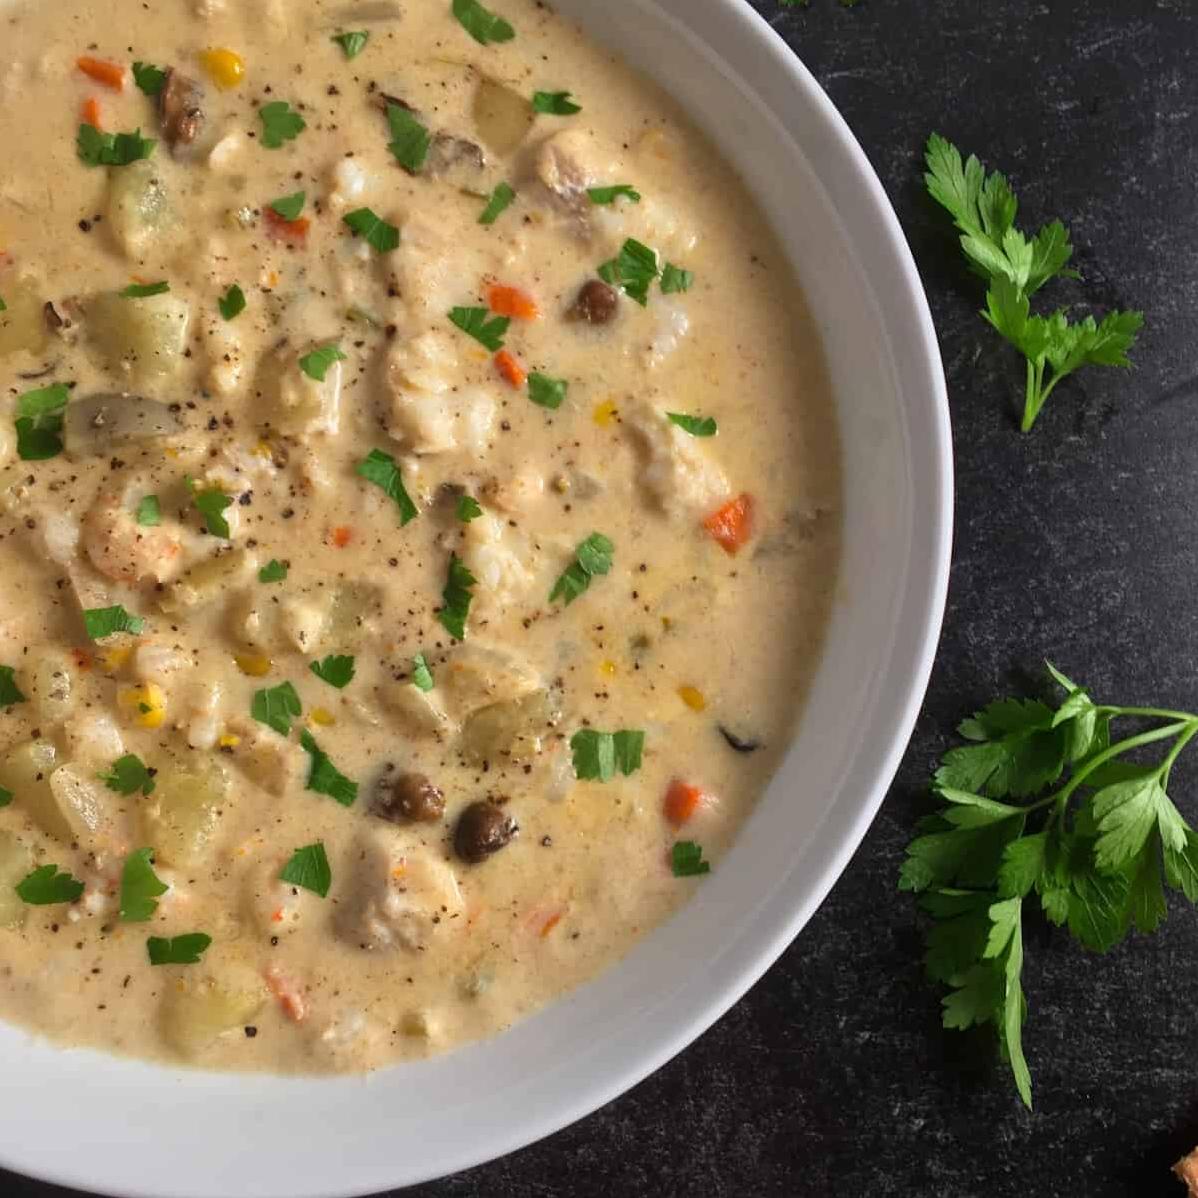  The creamy goodness of this chowder will have your taste buds dancing.